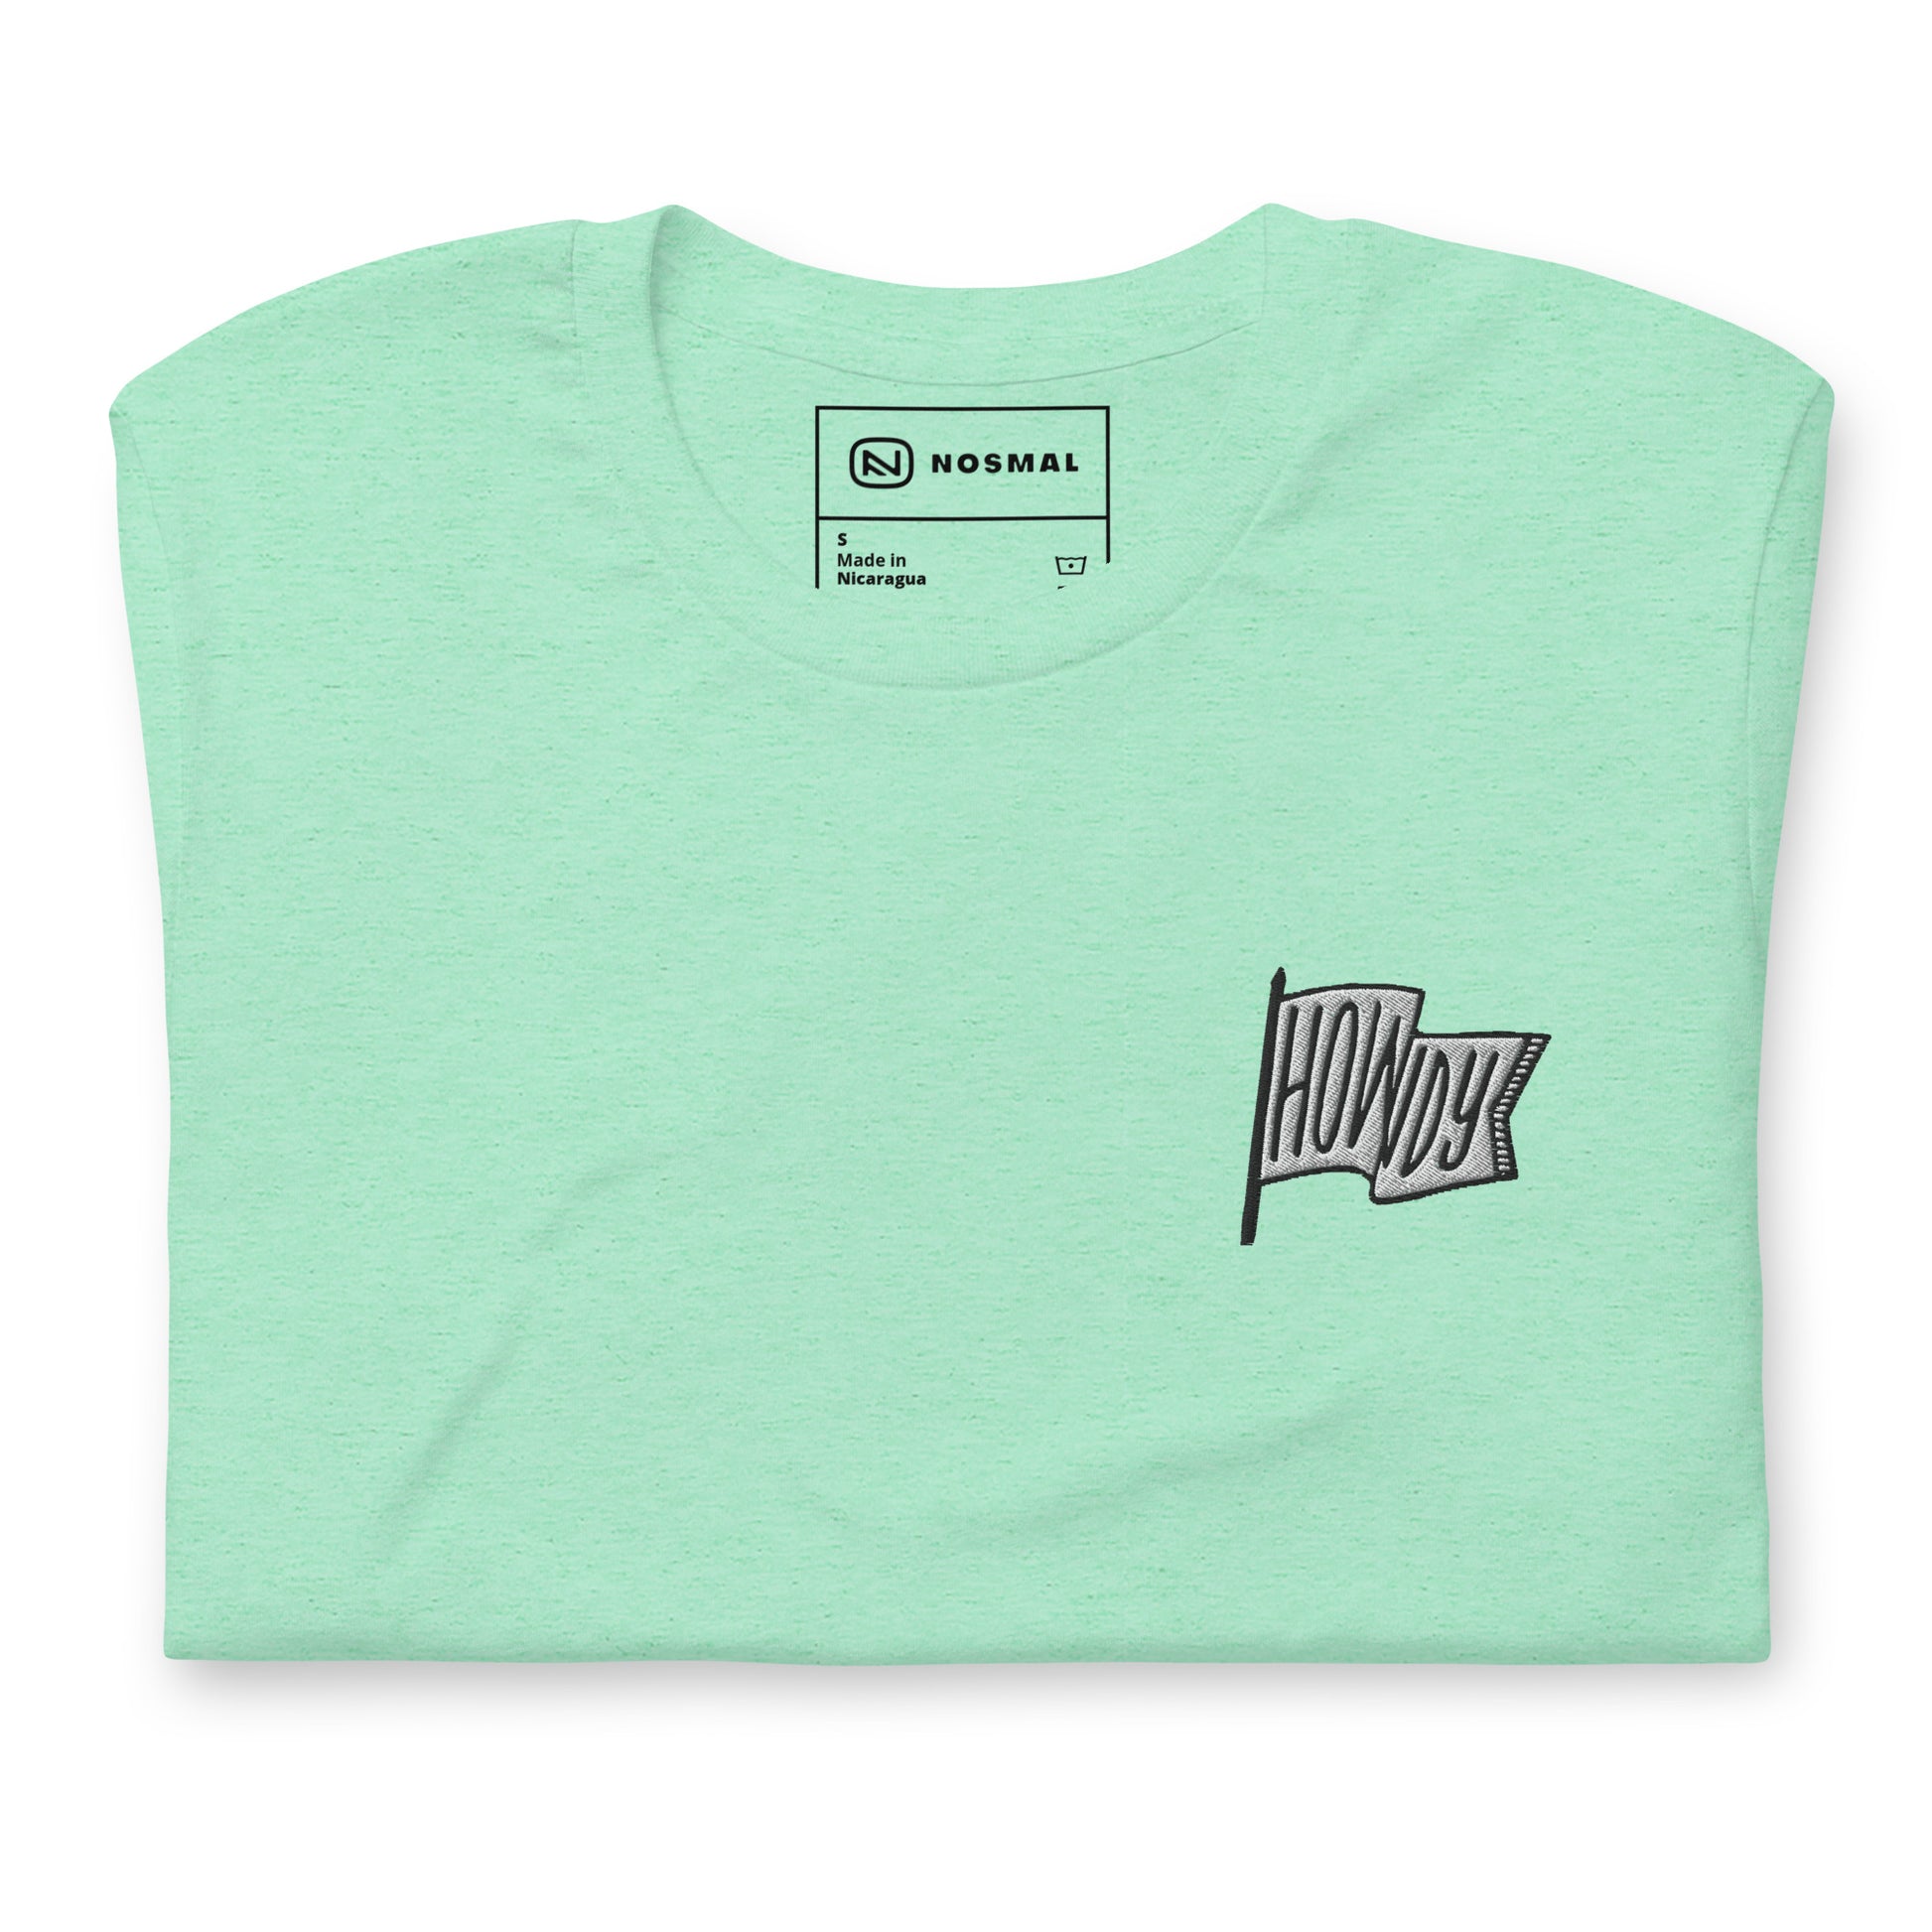 Top down view of howdy embroidered design on heather mint unisex t-shirt.